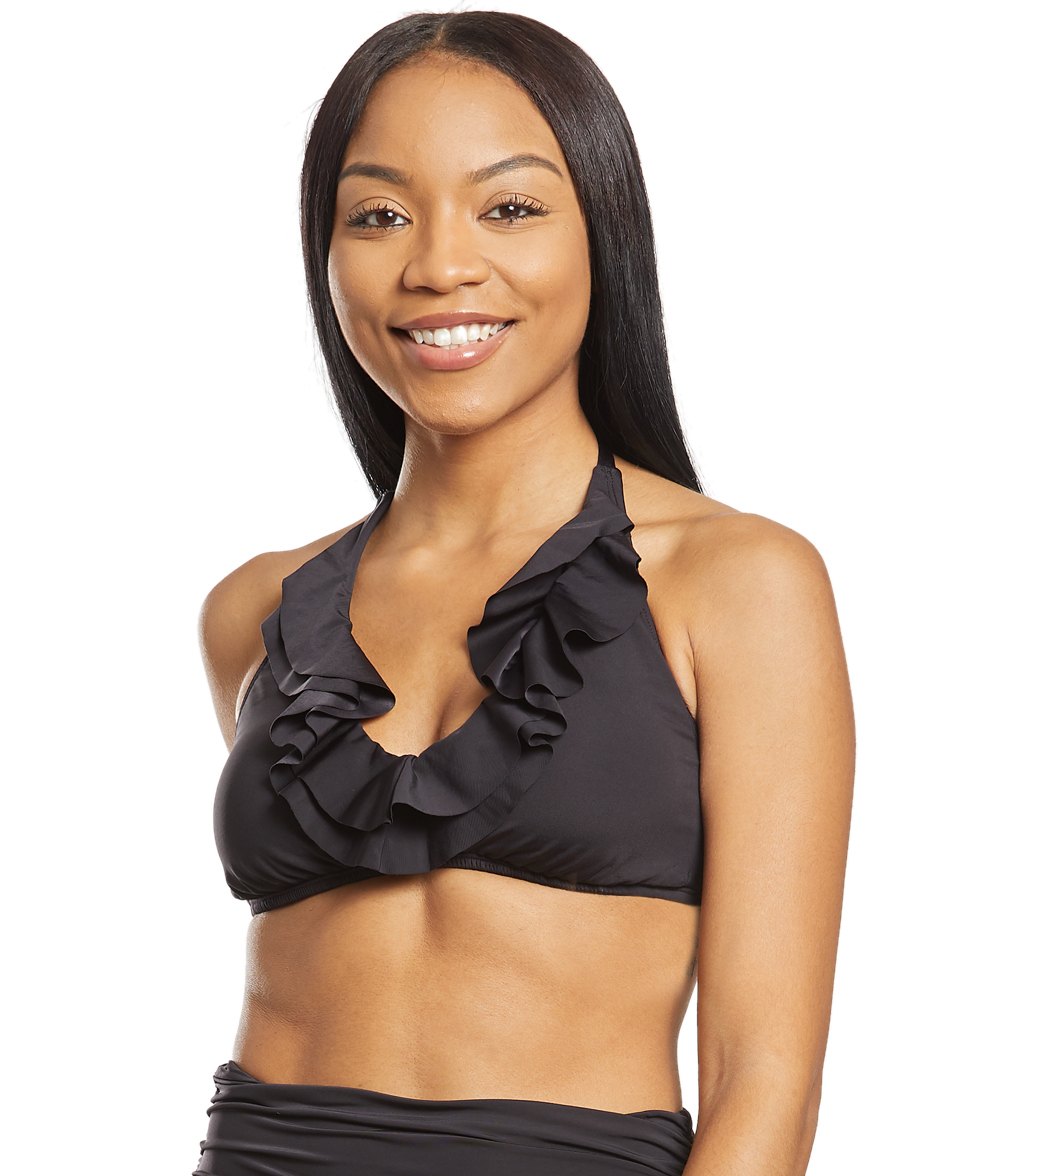 Kenneth Cole Reaction On The Move Ruffle Halter Bikini Top at SwimOutlet.com